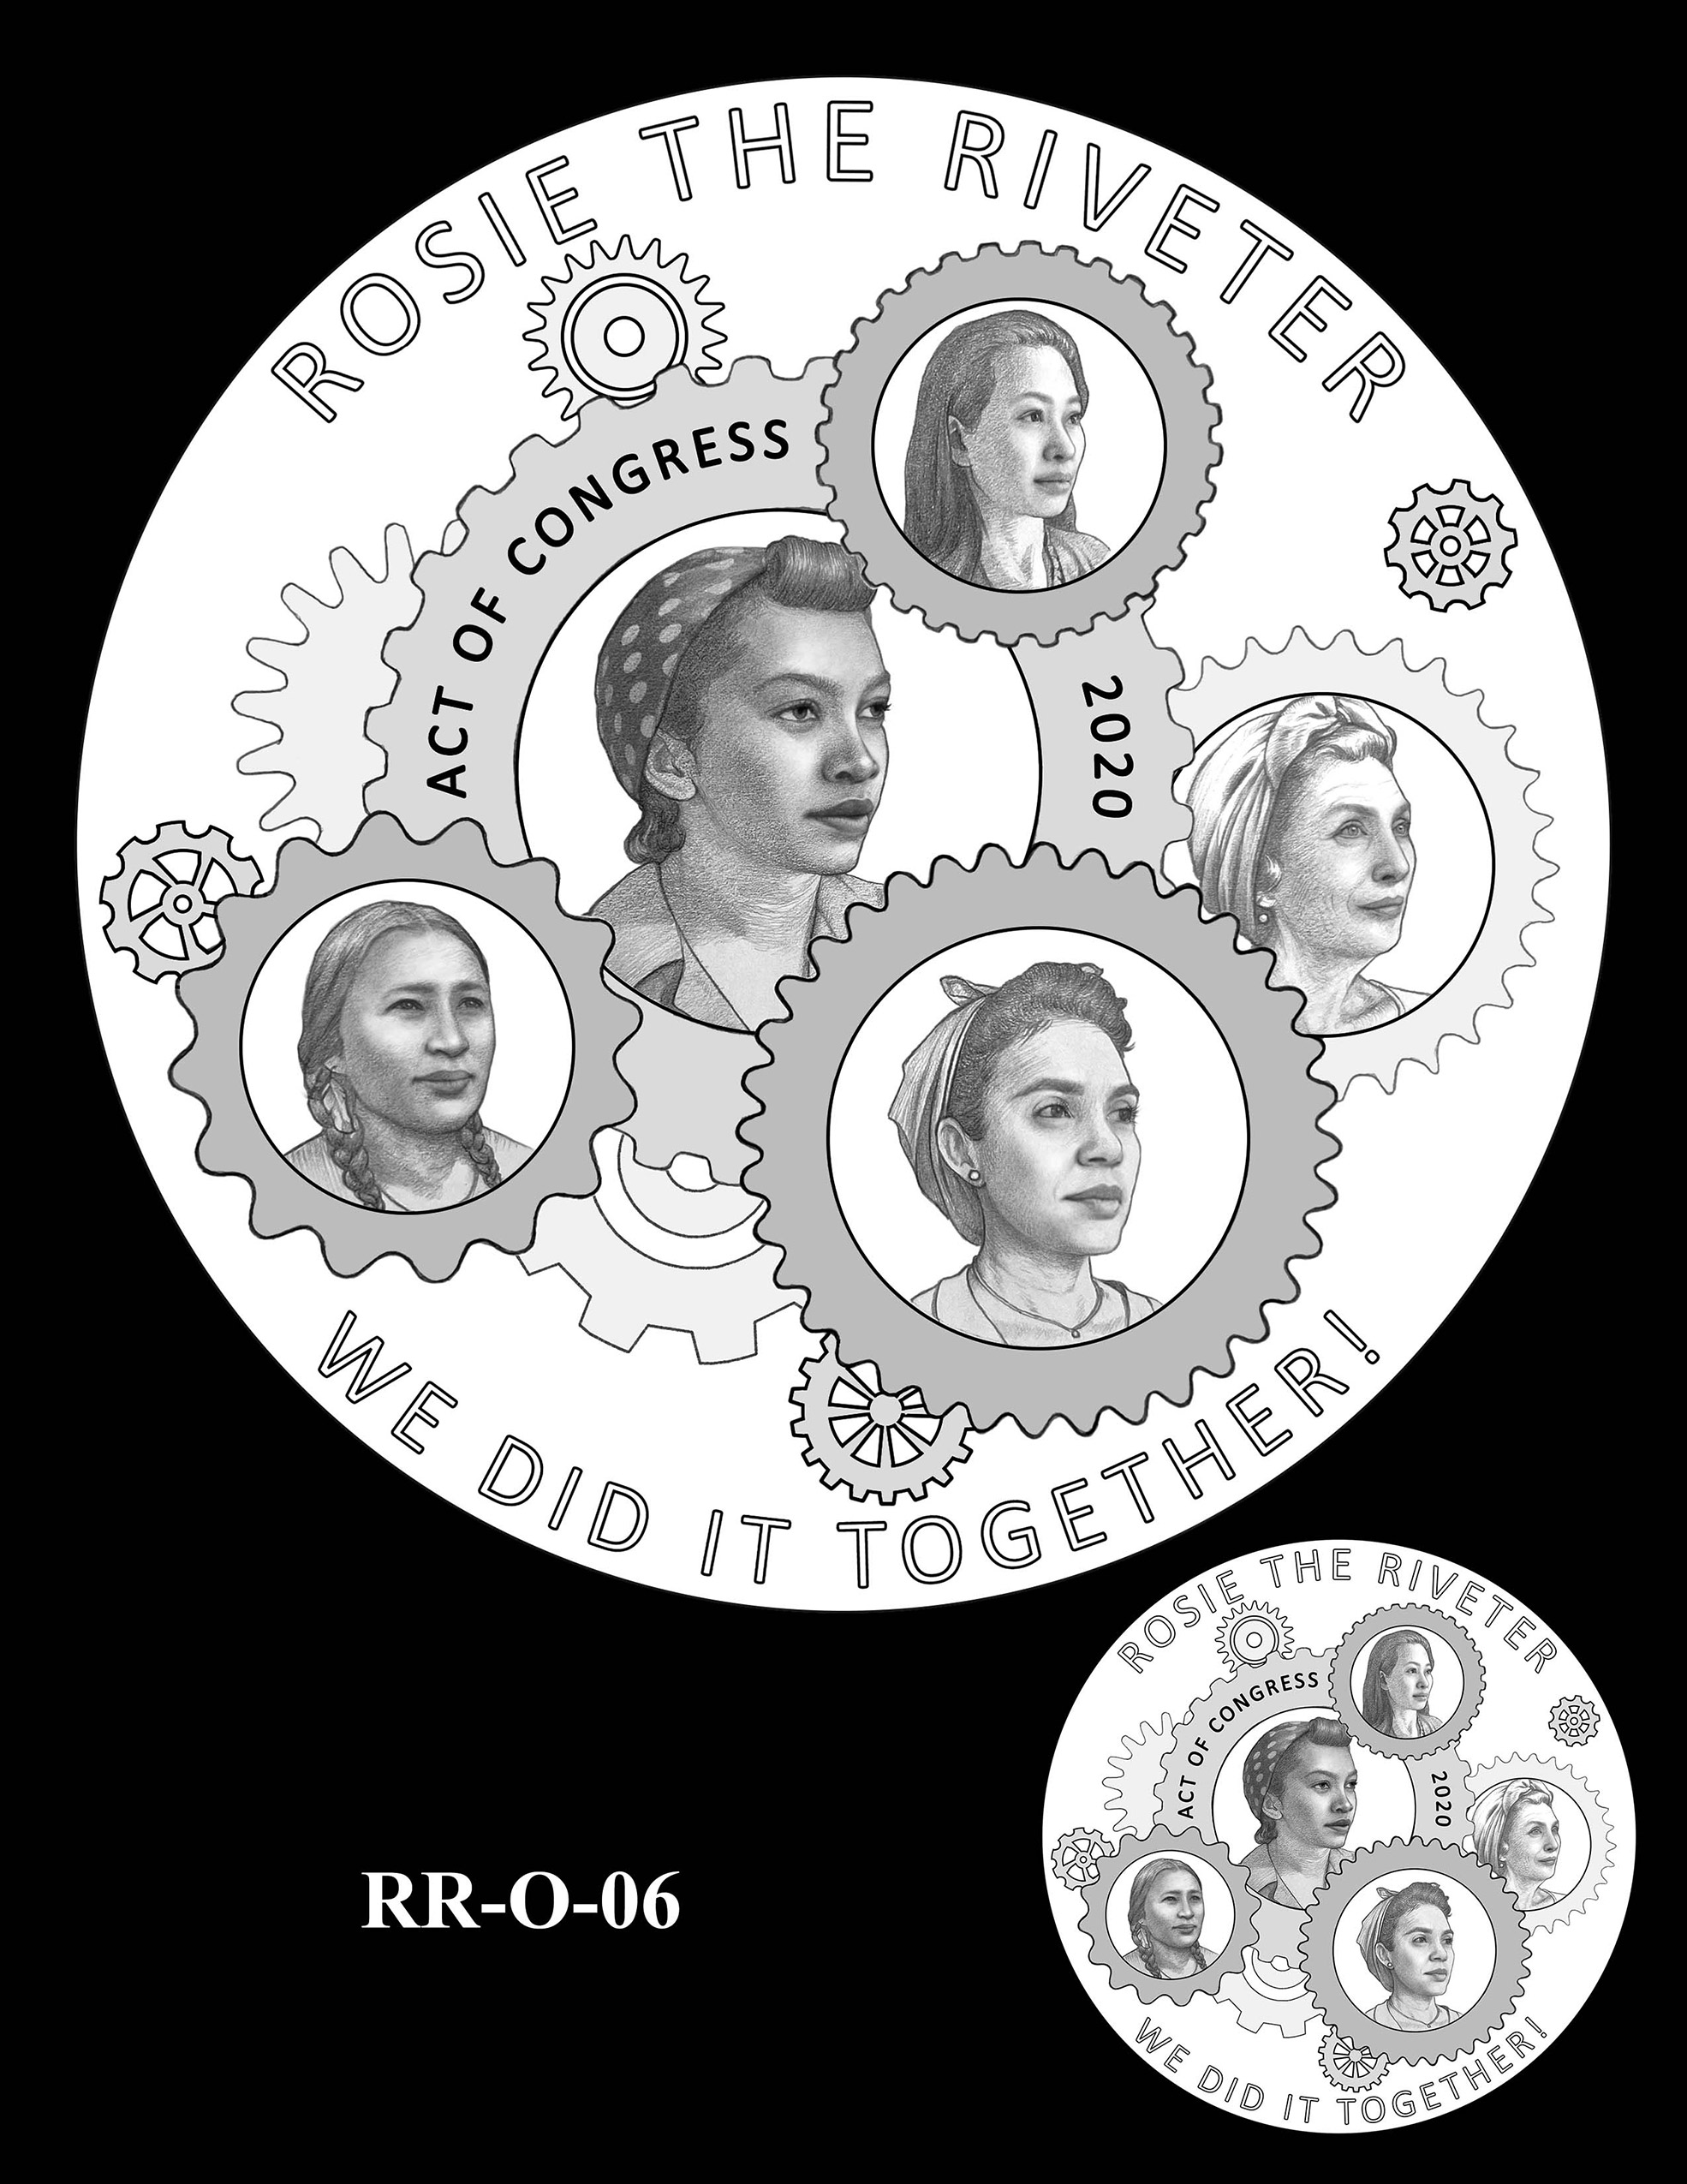 RR-O-06 -- Rosie the Riveter Congressional Gold Medal